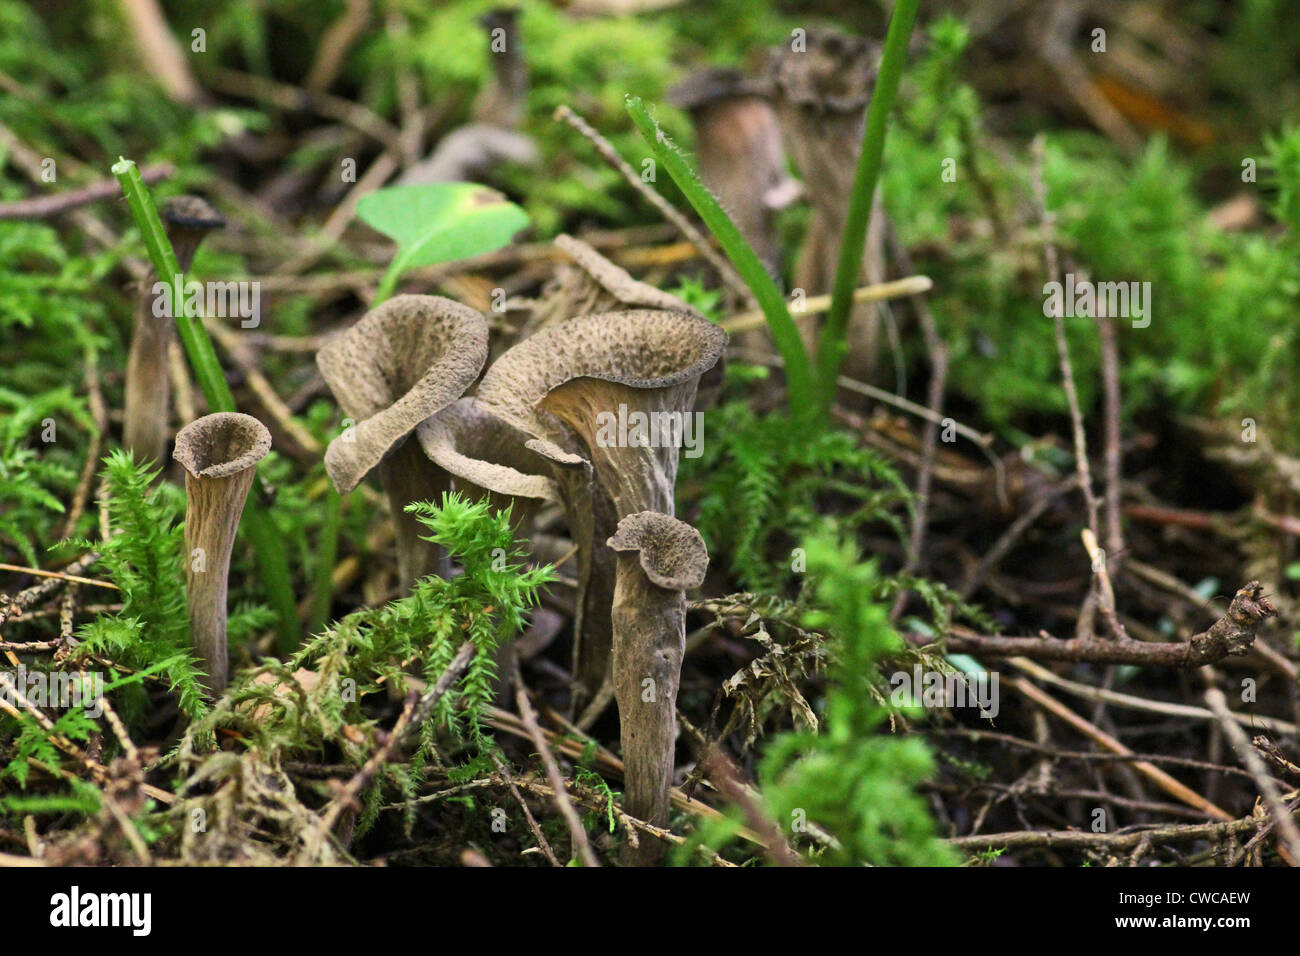 Several black trumpet mushrooms on the forest floor. Stock Photo